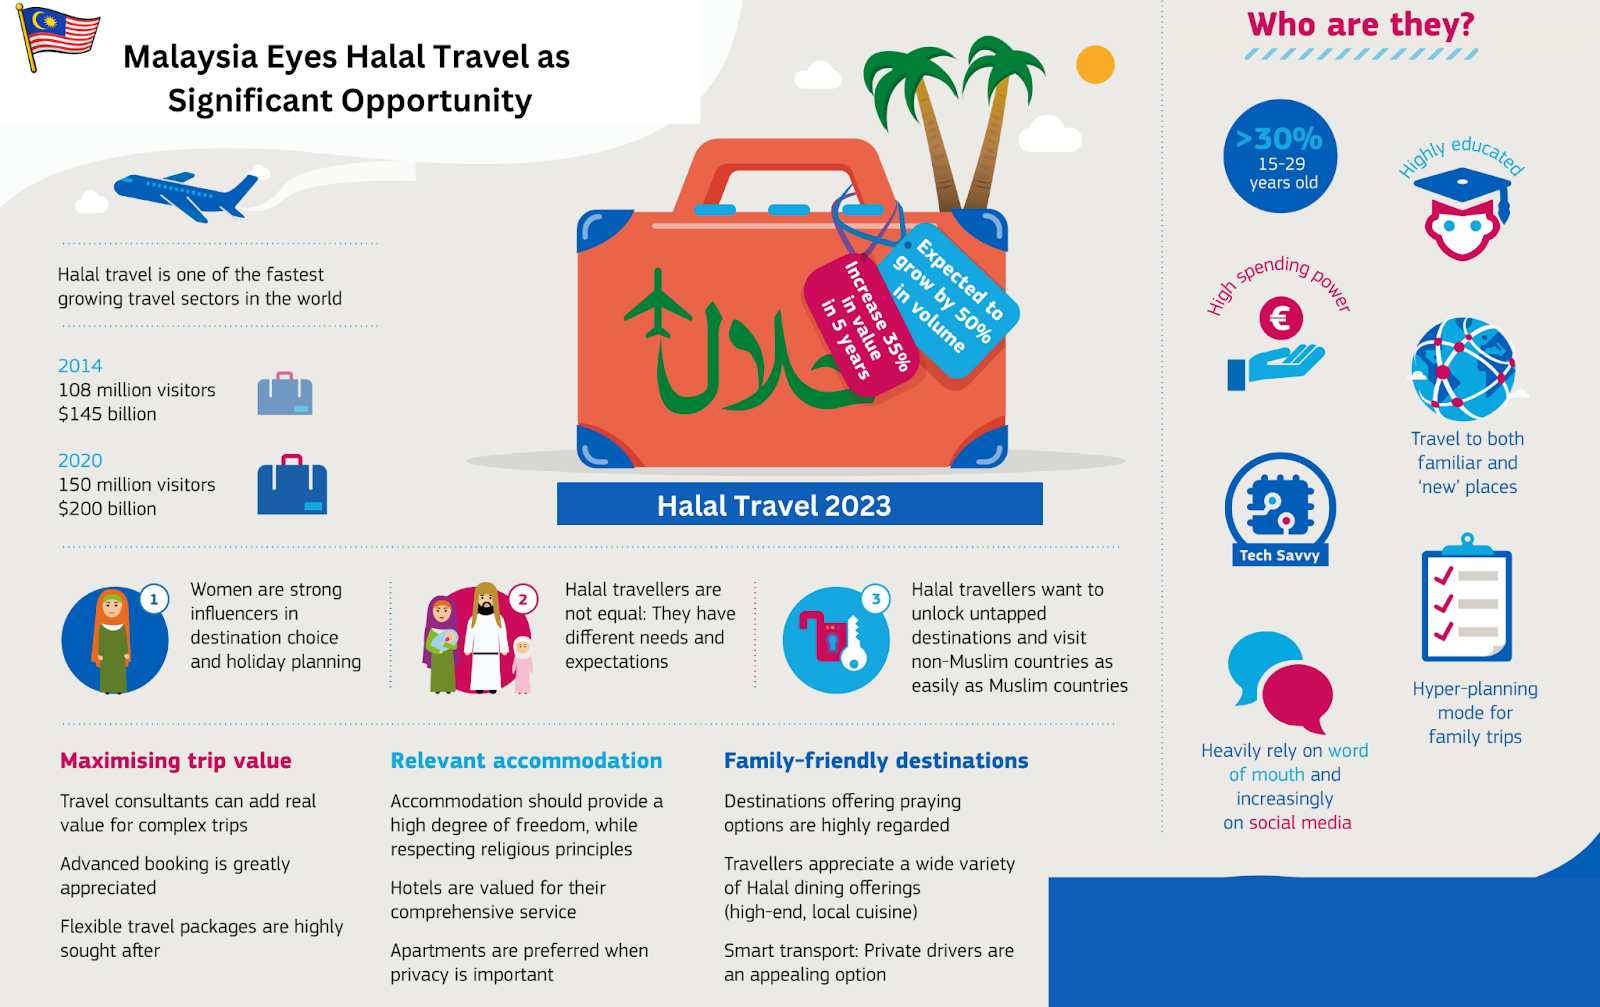 Malaysia Eyes Halal Travel as Significant Opportunity